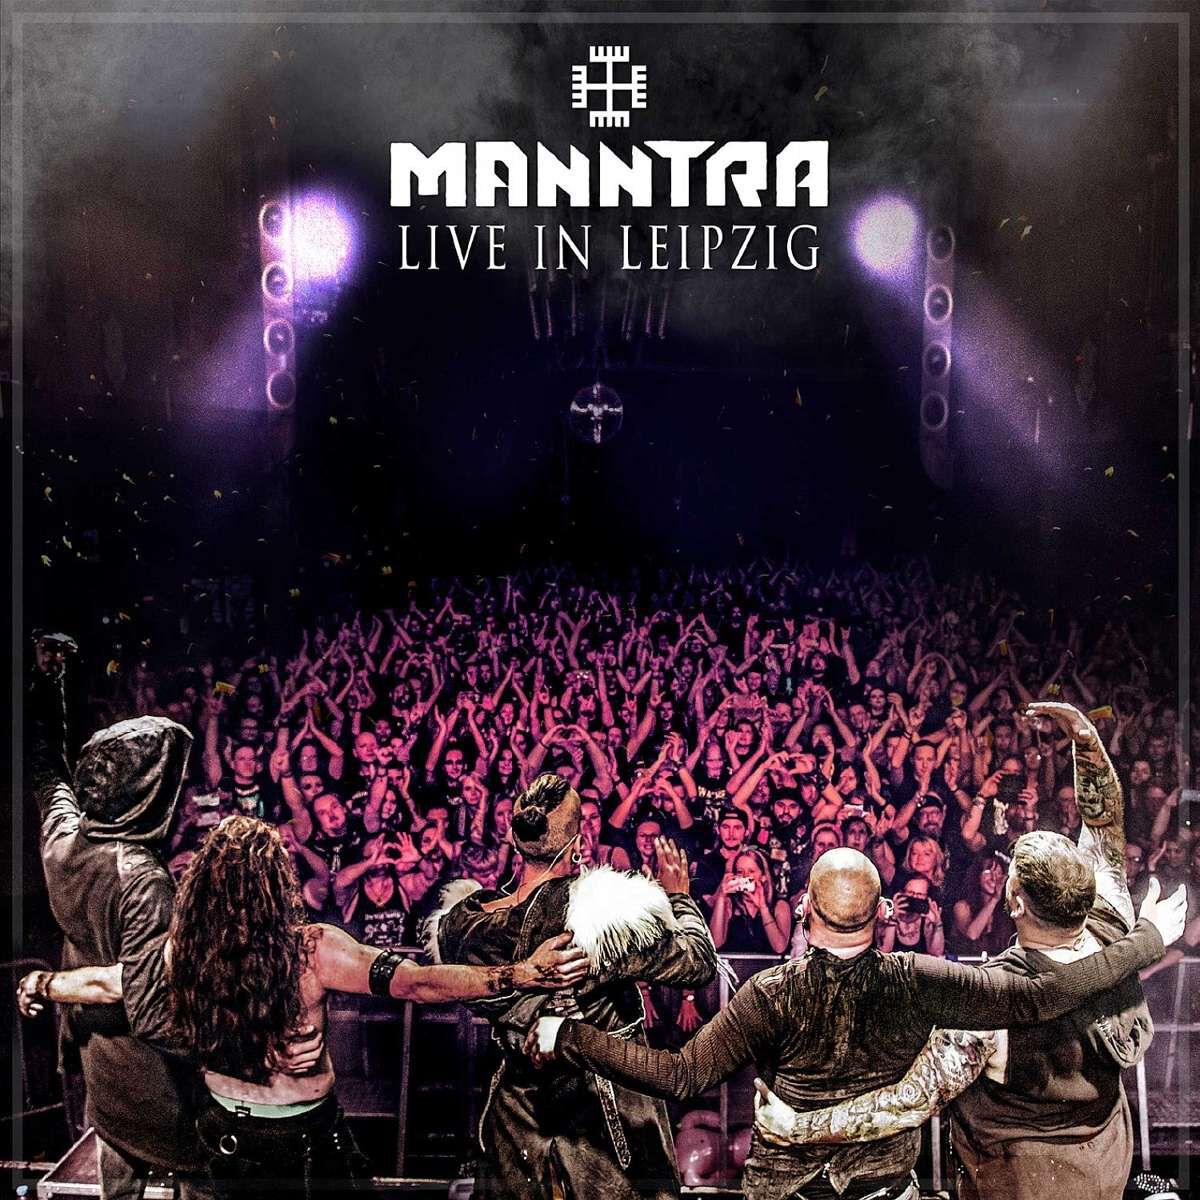 Manntra Live in Leipzig CD multicolor